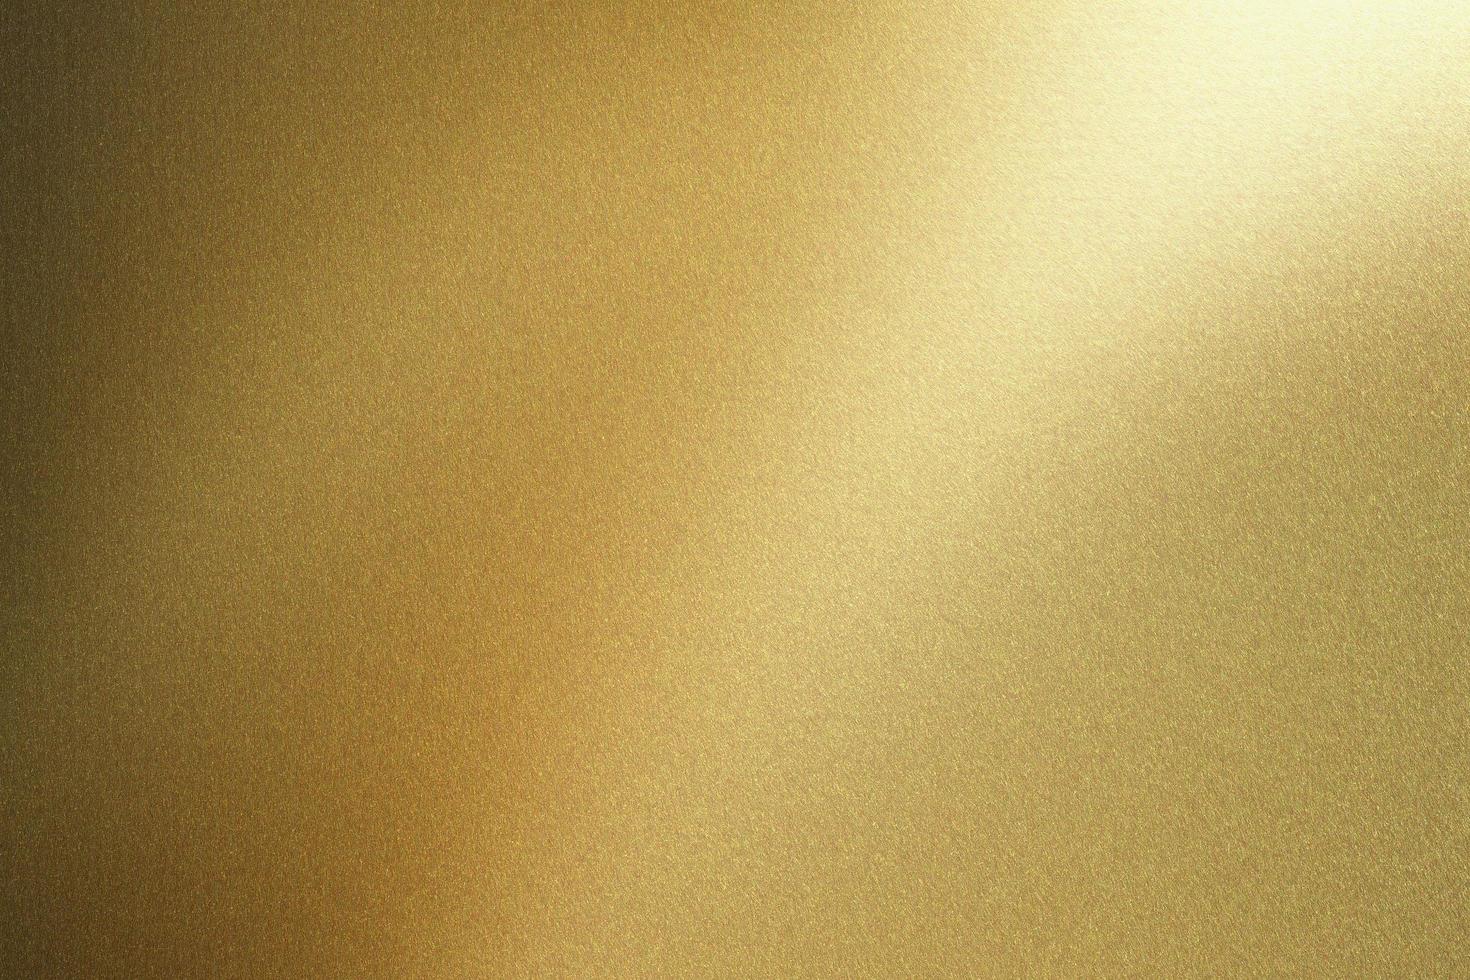 Light shining on gold steel wall, abstract texture background photo